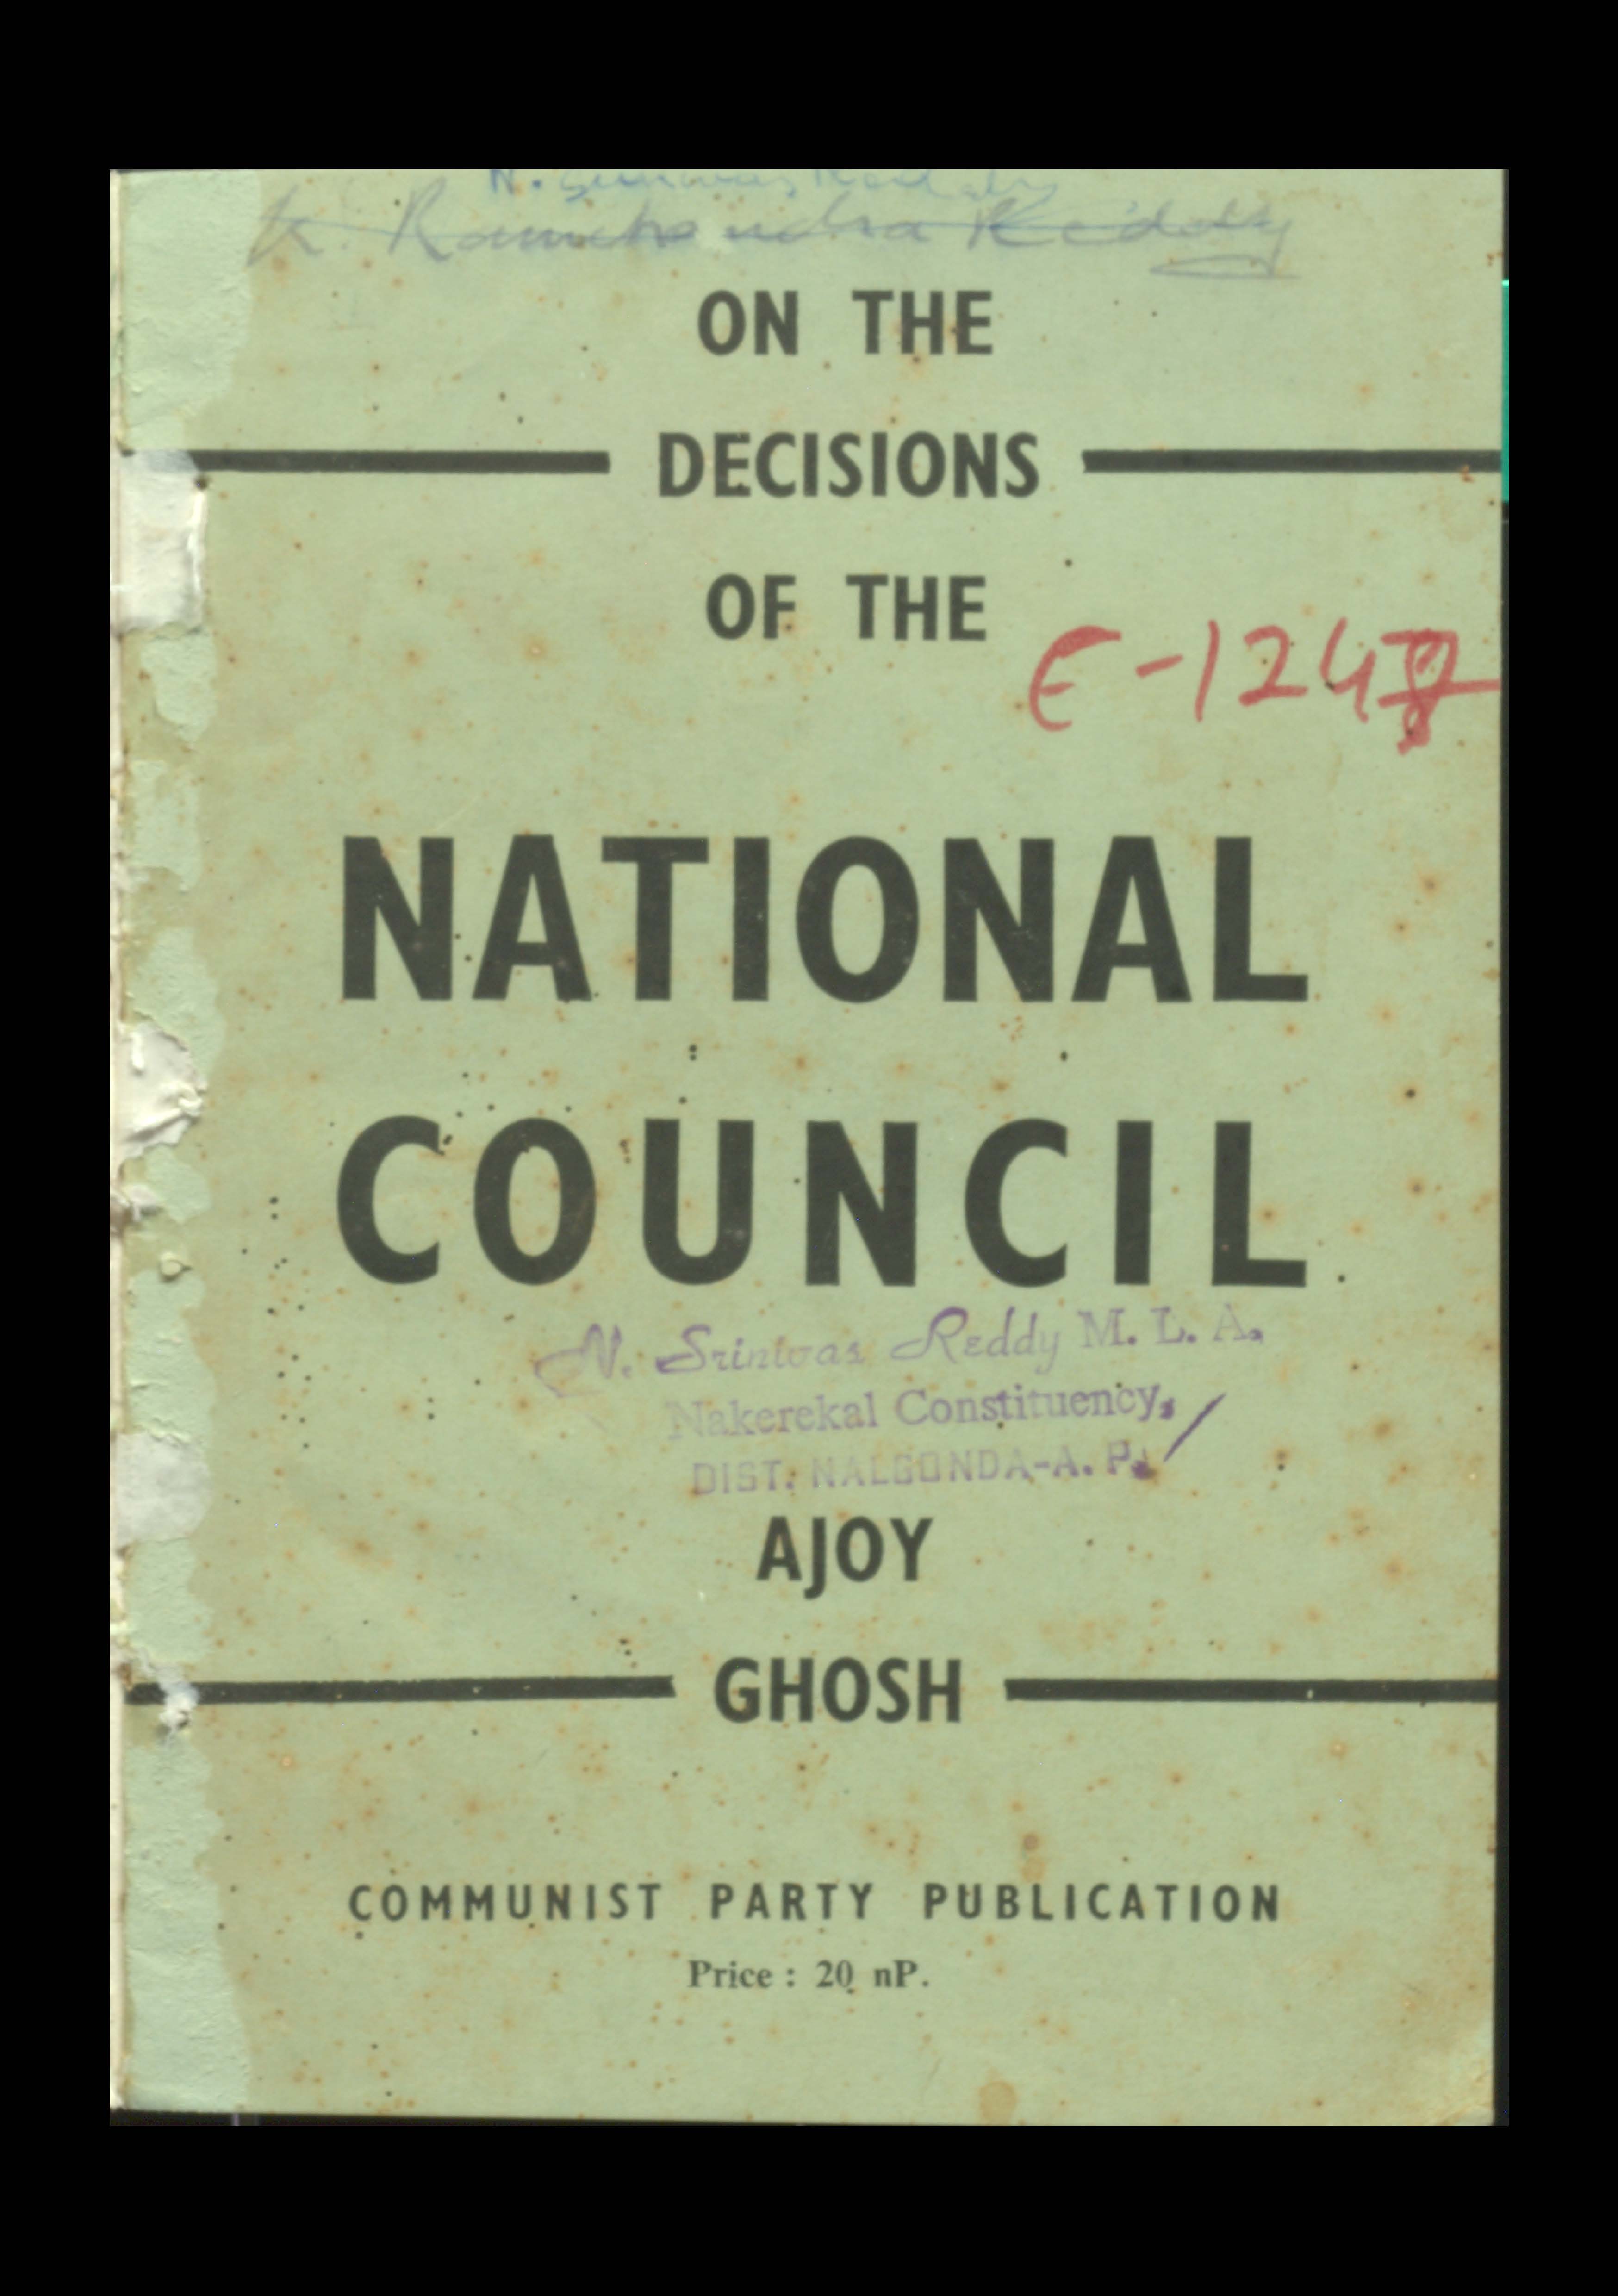 One The Decisions Of The National Council 